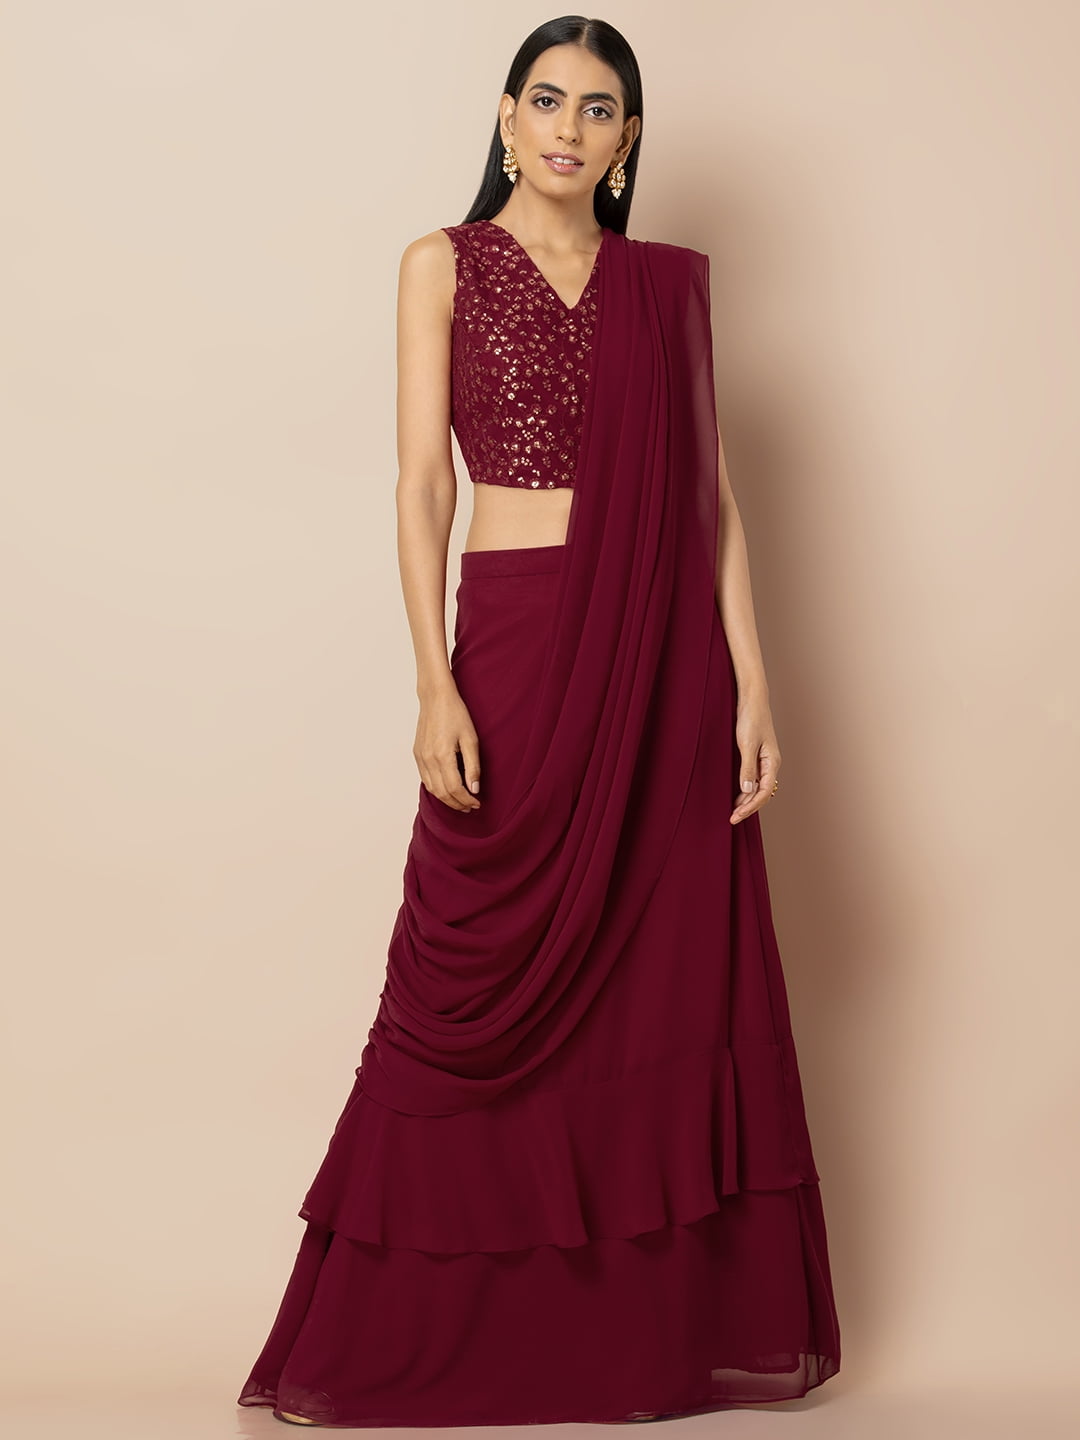 Burgundy Gown With Attached Dupatta - L | Burgundy gown, Pink gowns,  Anarkali dress pattern